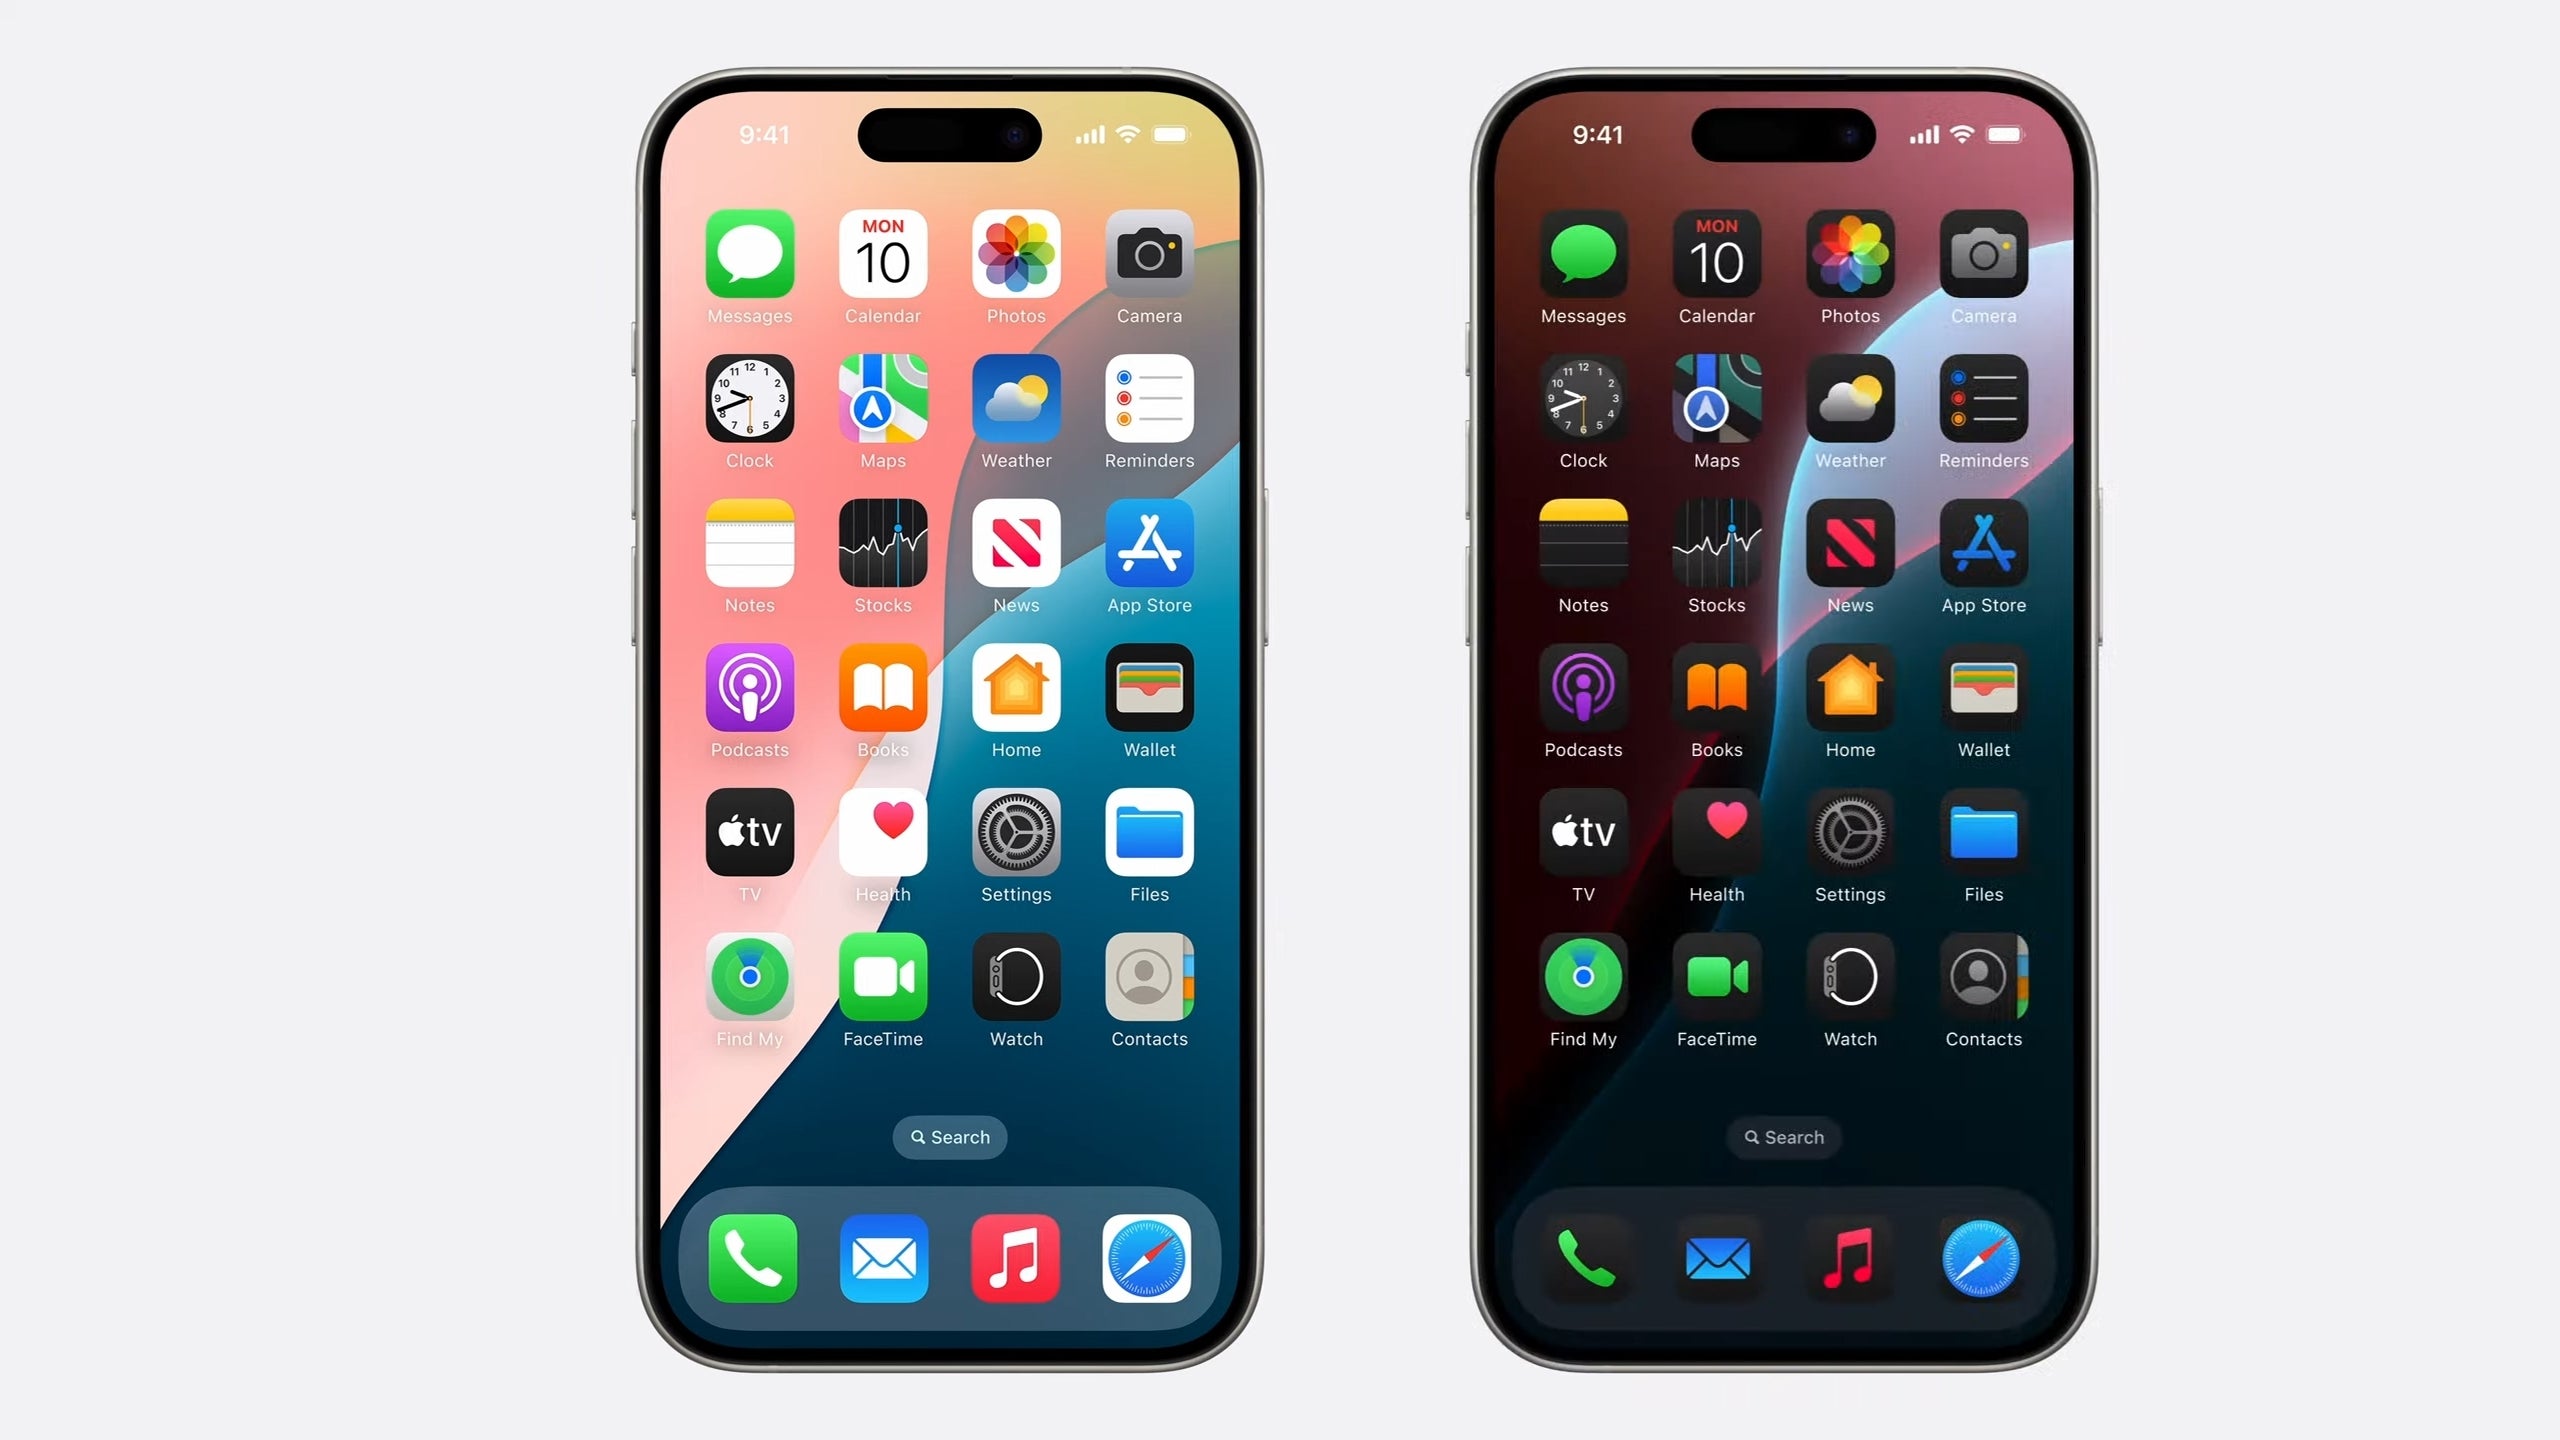 iOS 18 will give you even more customization over iOS &amp;nbsp - iOS 18 breaks cover: A milestone update for the iPhone, powered by AI